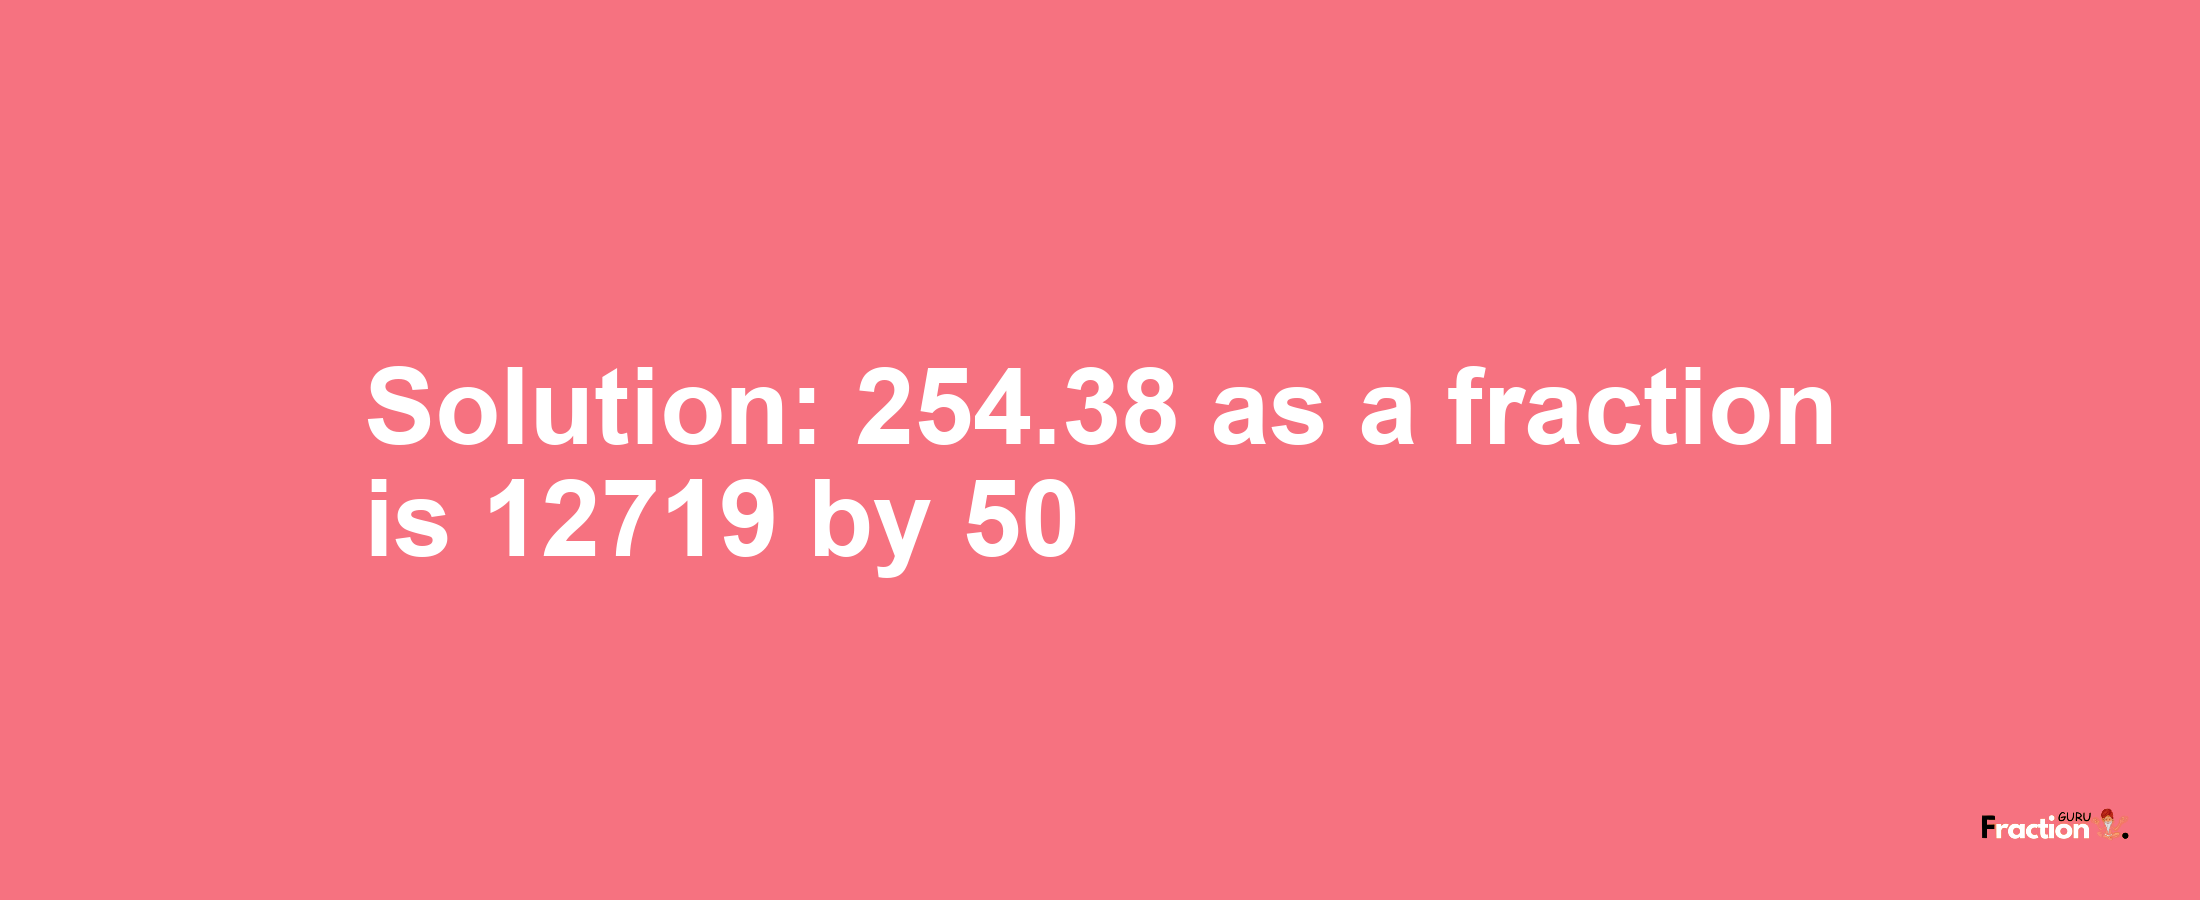 Solution:254.38 as a fraction is 12719/50